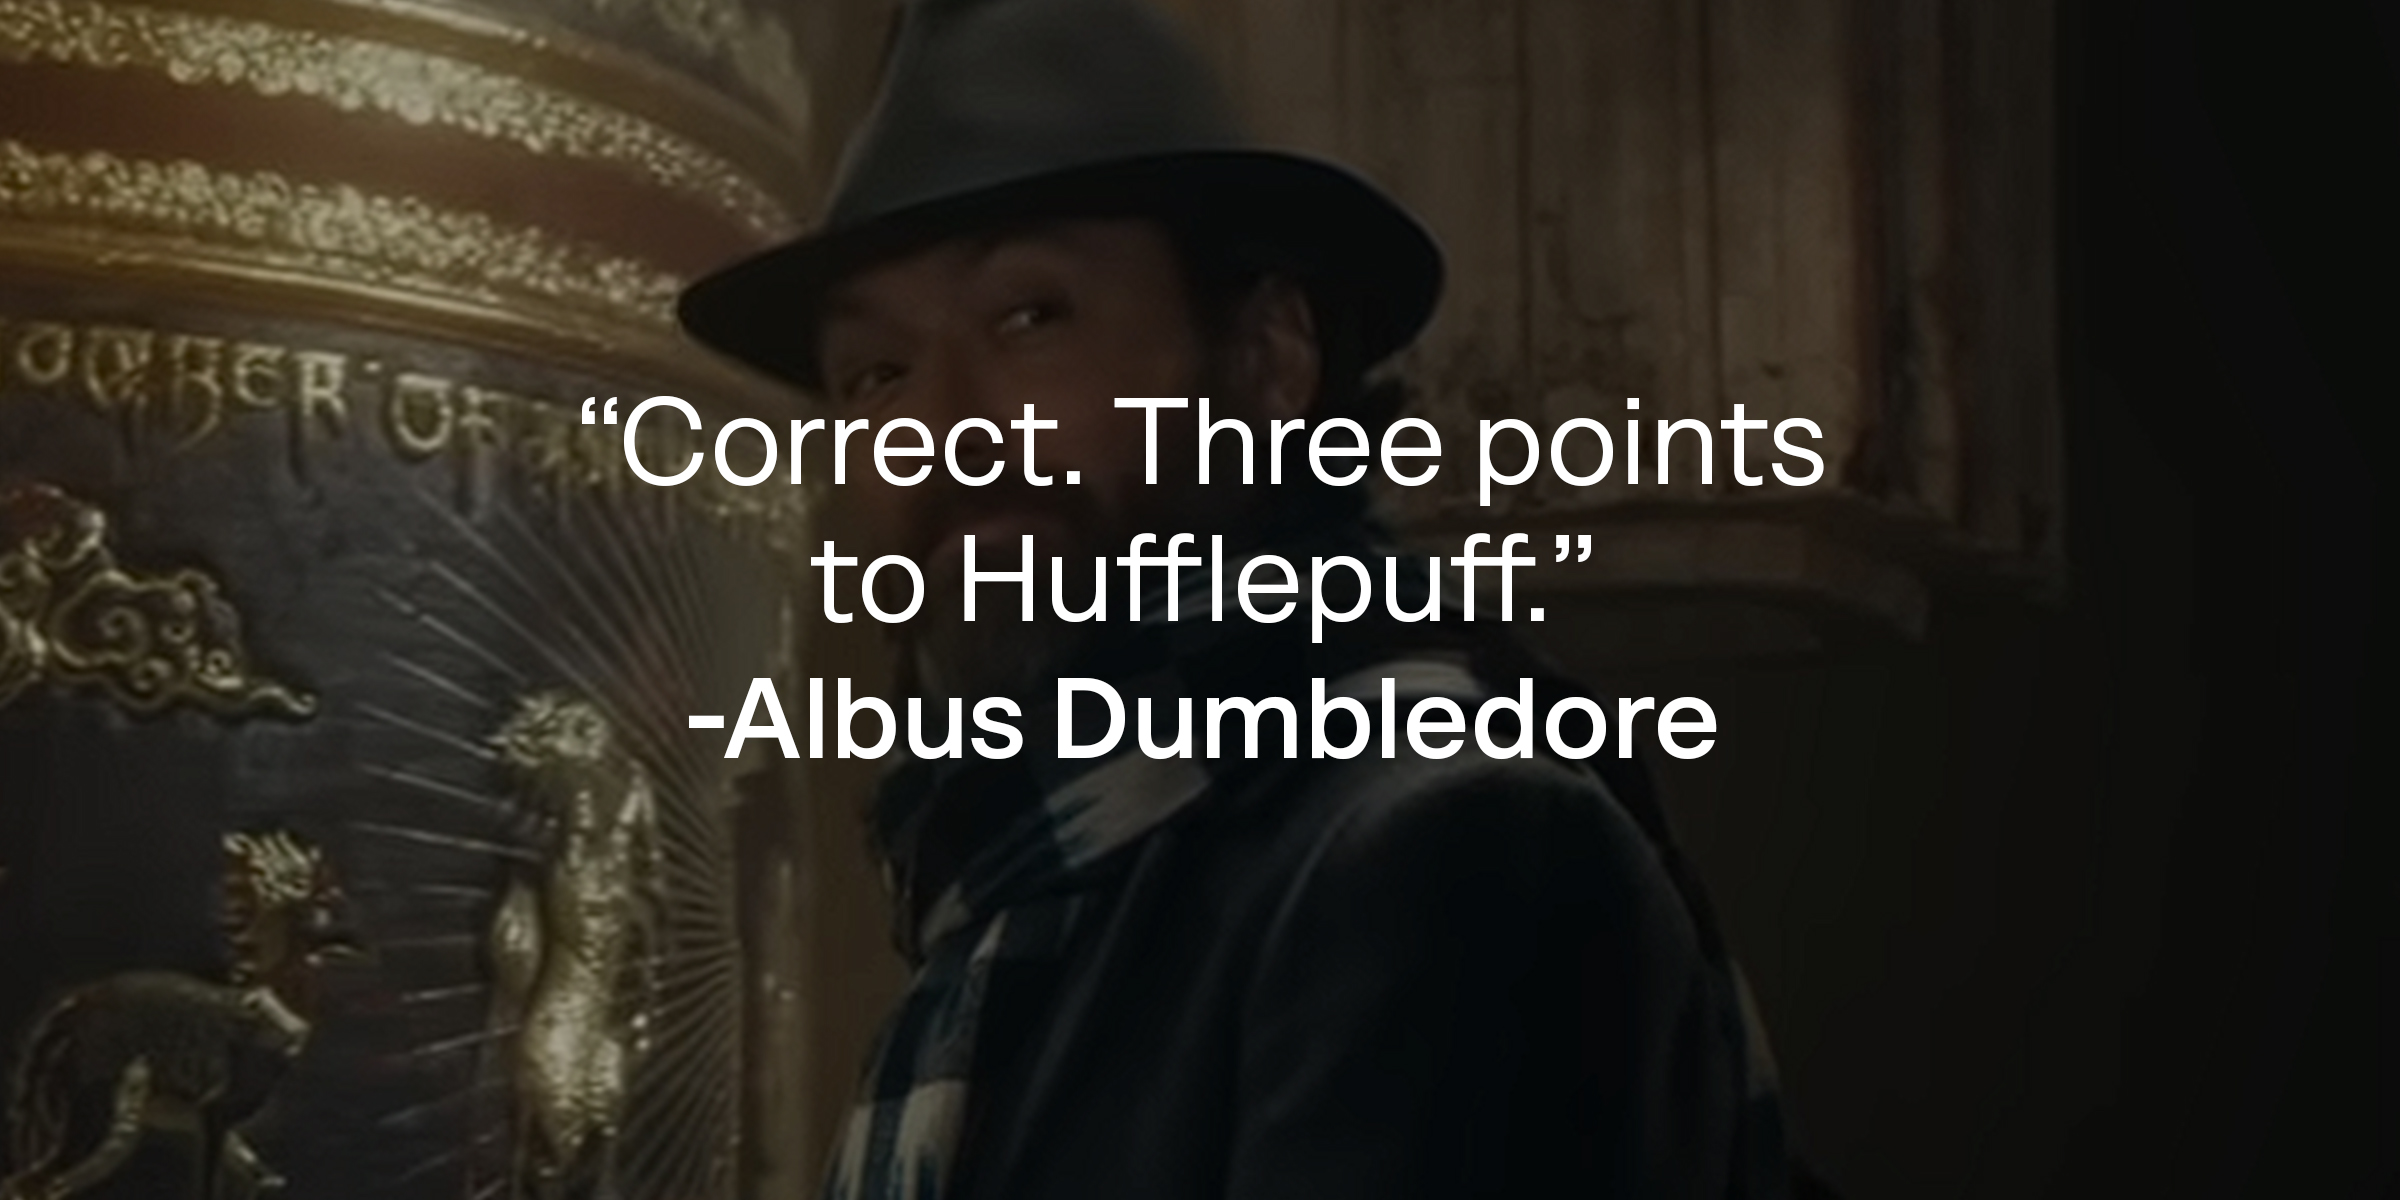 Albus Dumbledore, with his quote: "Correct. Three points to Hufflepuff." | Source: Youtube.com/WarnerBrosPictures